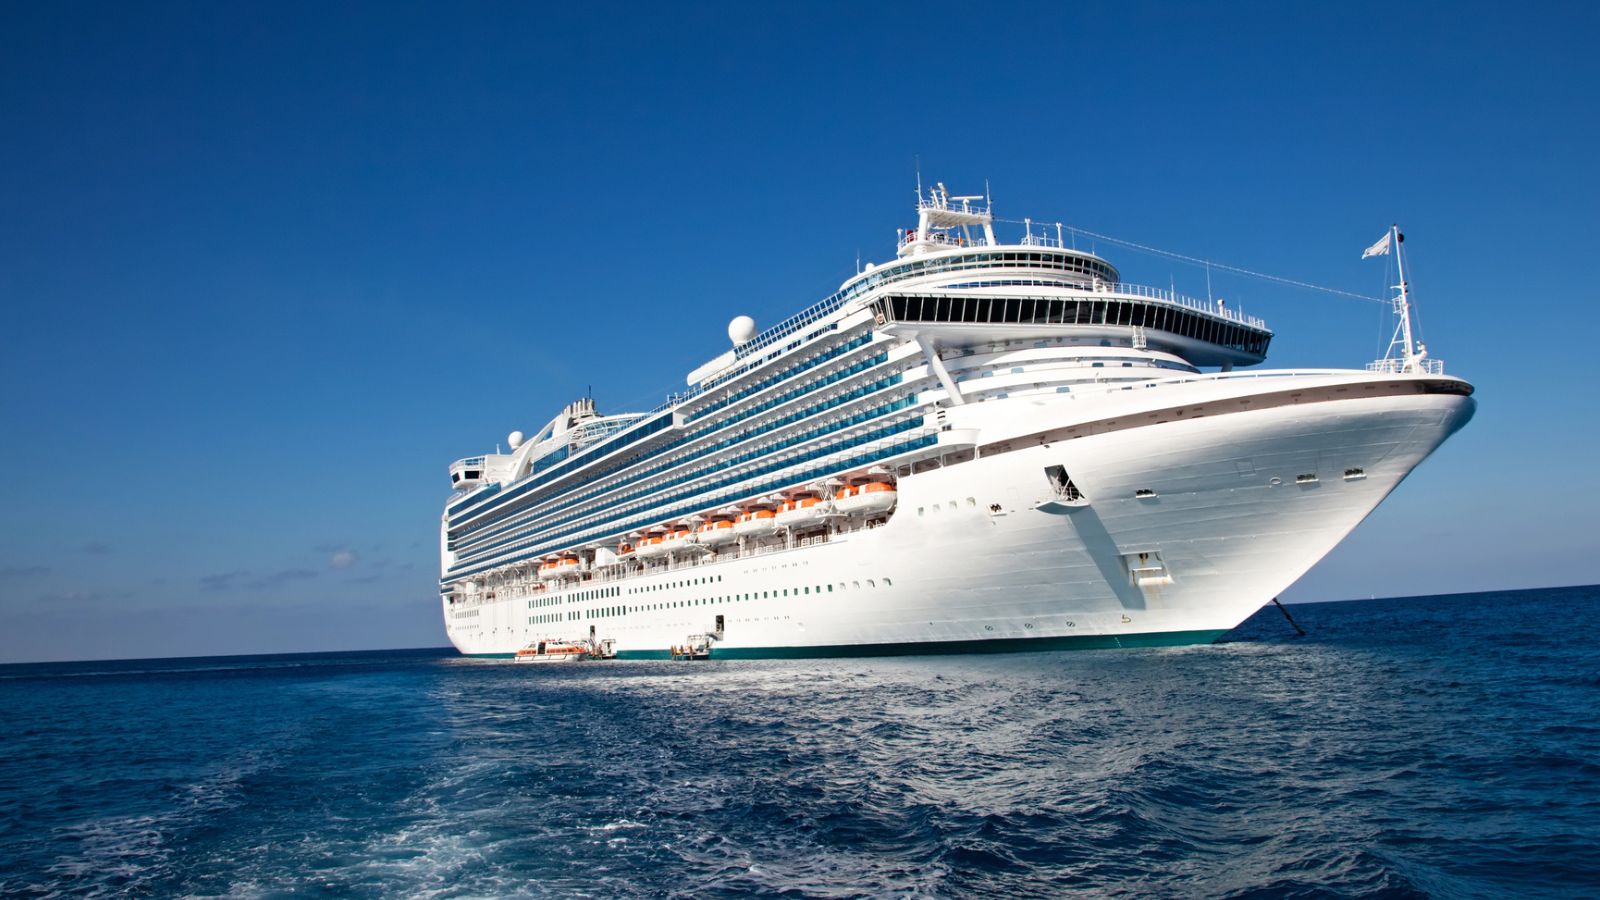 <p>Cruise ships have to sail between destinations in readiness for the coming season. This is called a <em>repositioning cruise</em>, and you can book tickets for them at discounted prices. They’re often less crowded, too.</p><p>The downside from a travel perspective is there may be fewer stops along the way. However, if you want the experience of a cruise and are searching for a bargain, it’s another excellent option.</p>